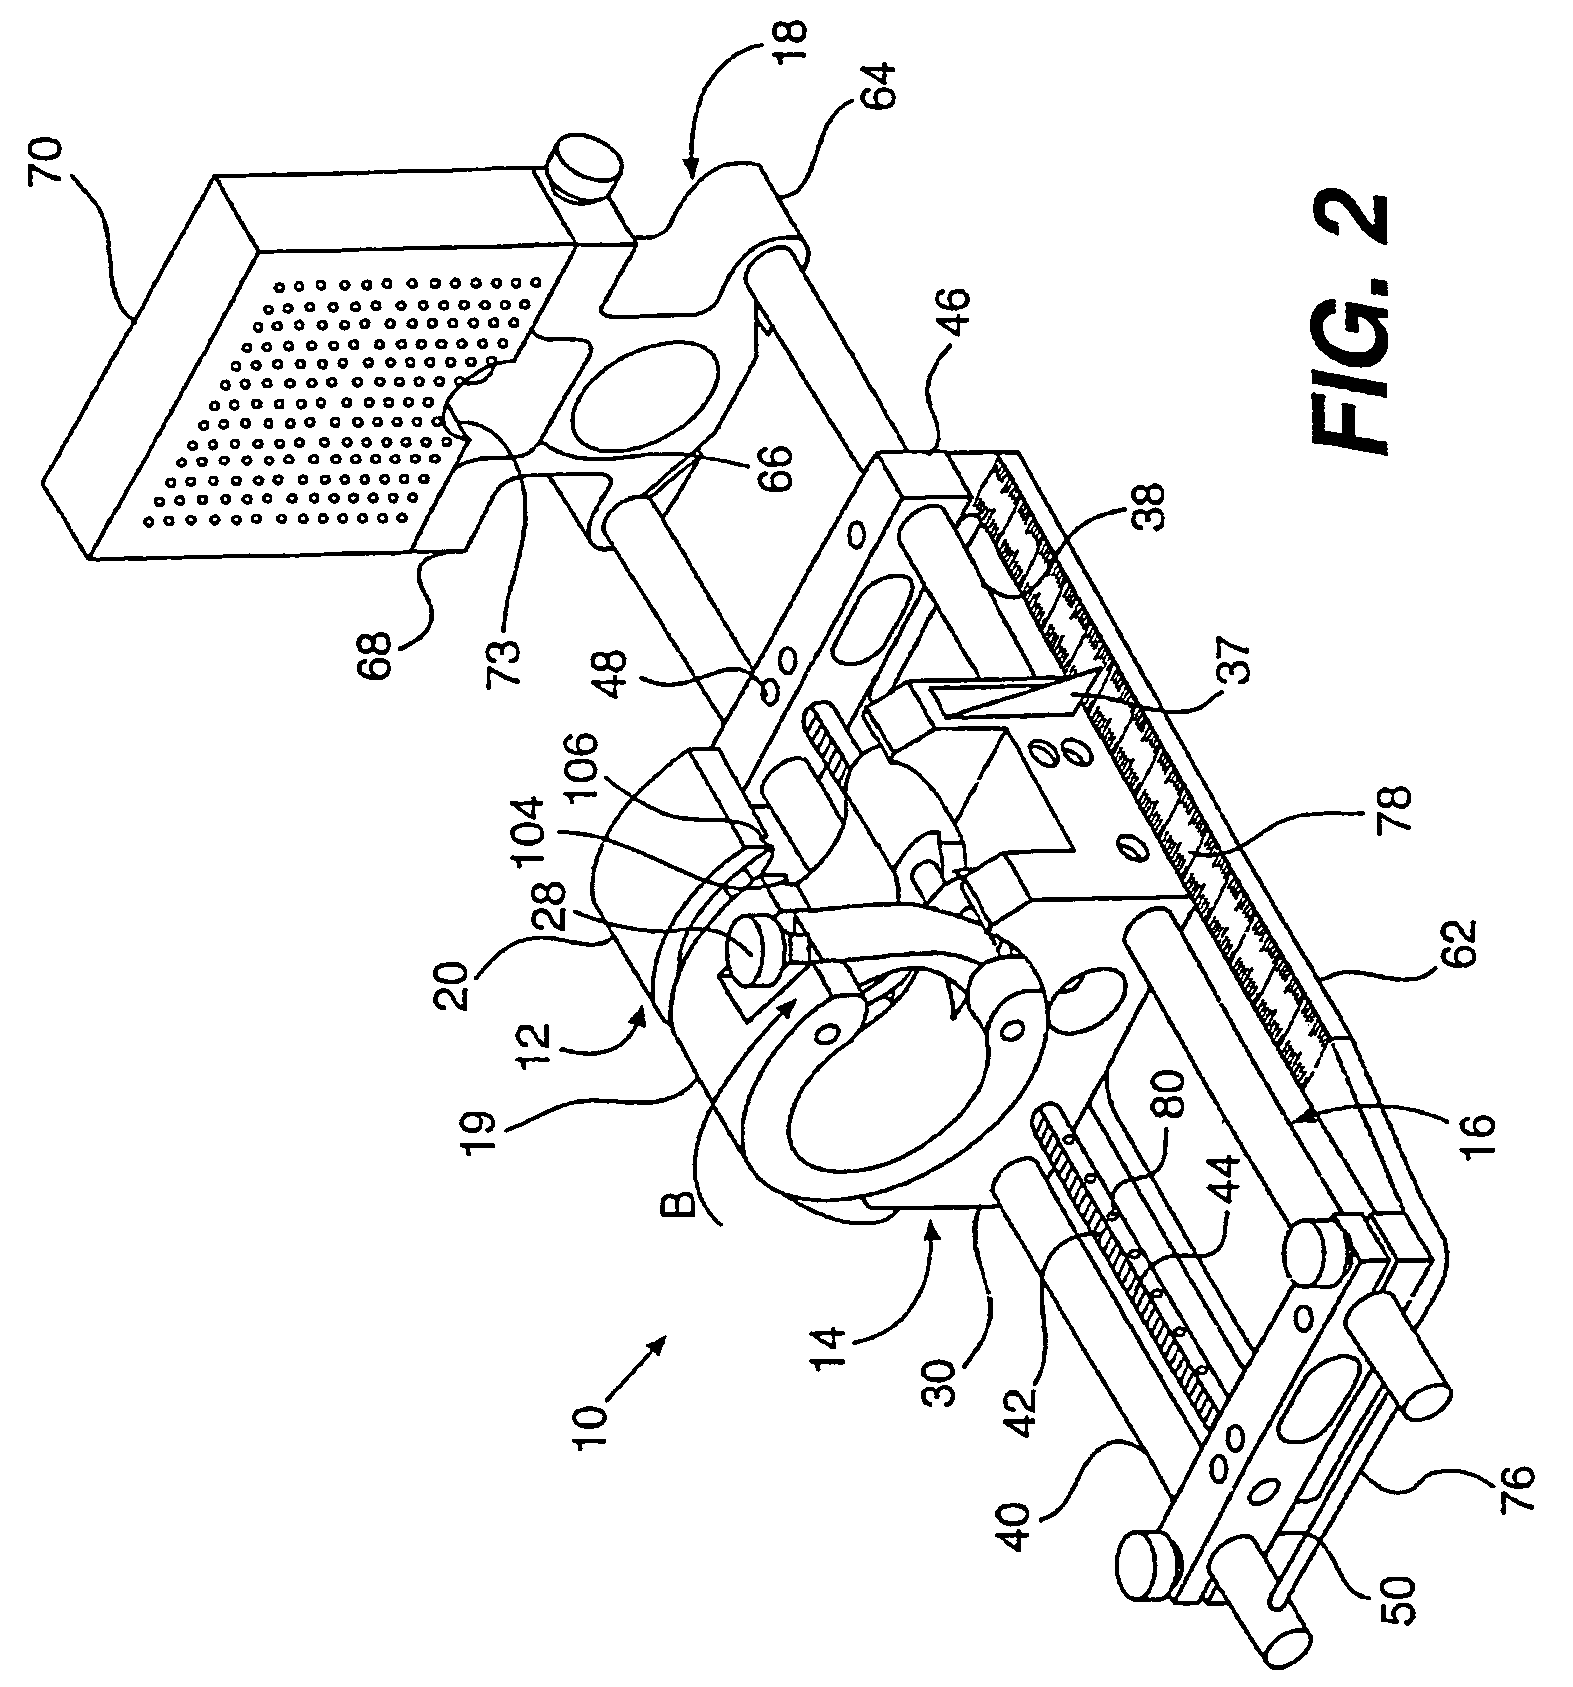 Ultrasound probe support and stepping device